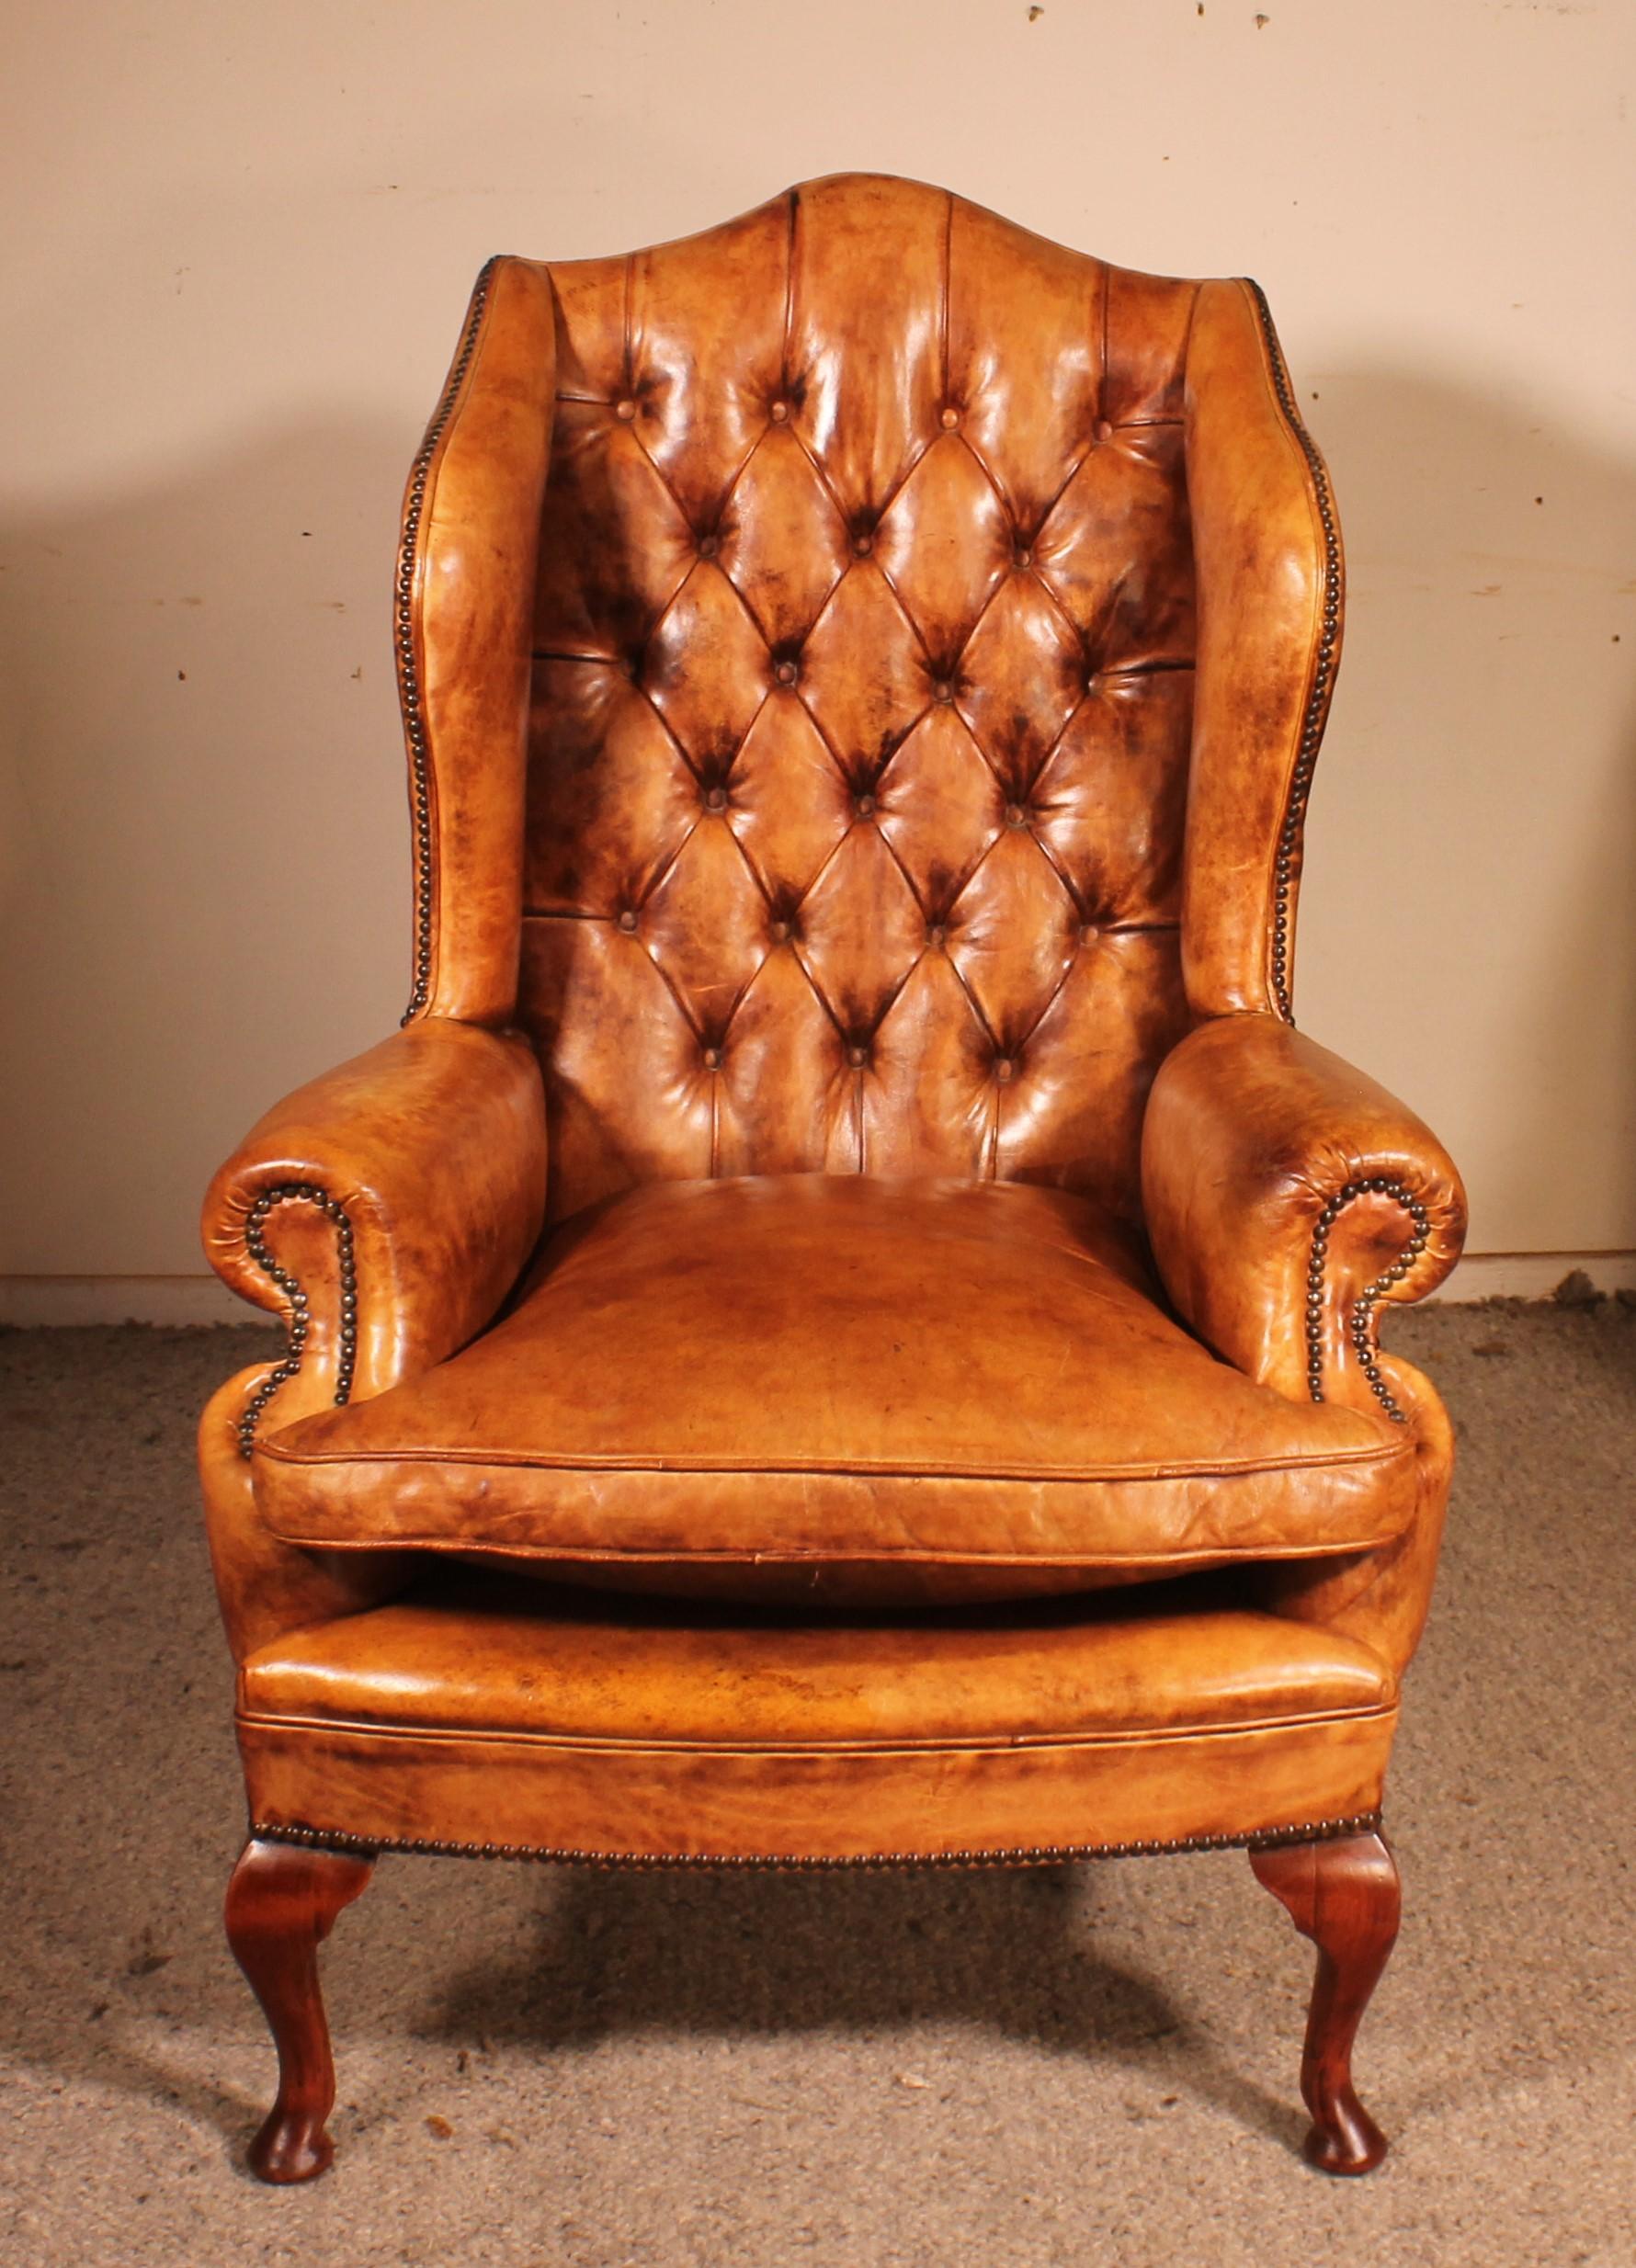 superb wing chair called Queen Anne in cognac-coloured leather from England

Very beautiful model resting on a mahogany base.
We had it re-strapped by our upholsterer 
It is rare to find a leather armchair that has such a beautiful patina